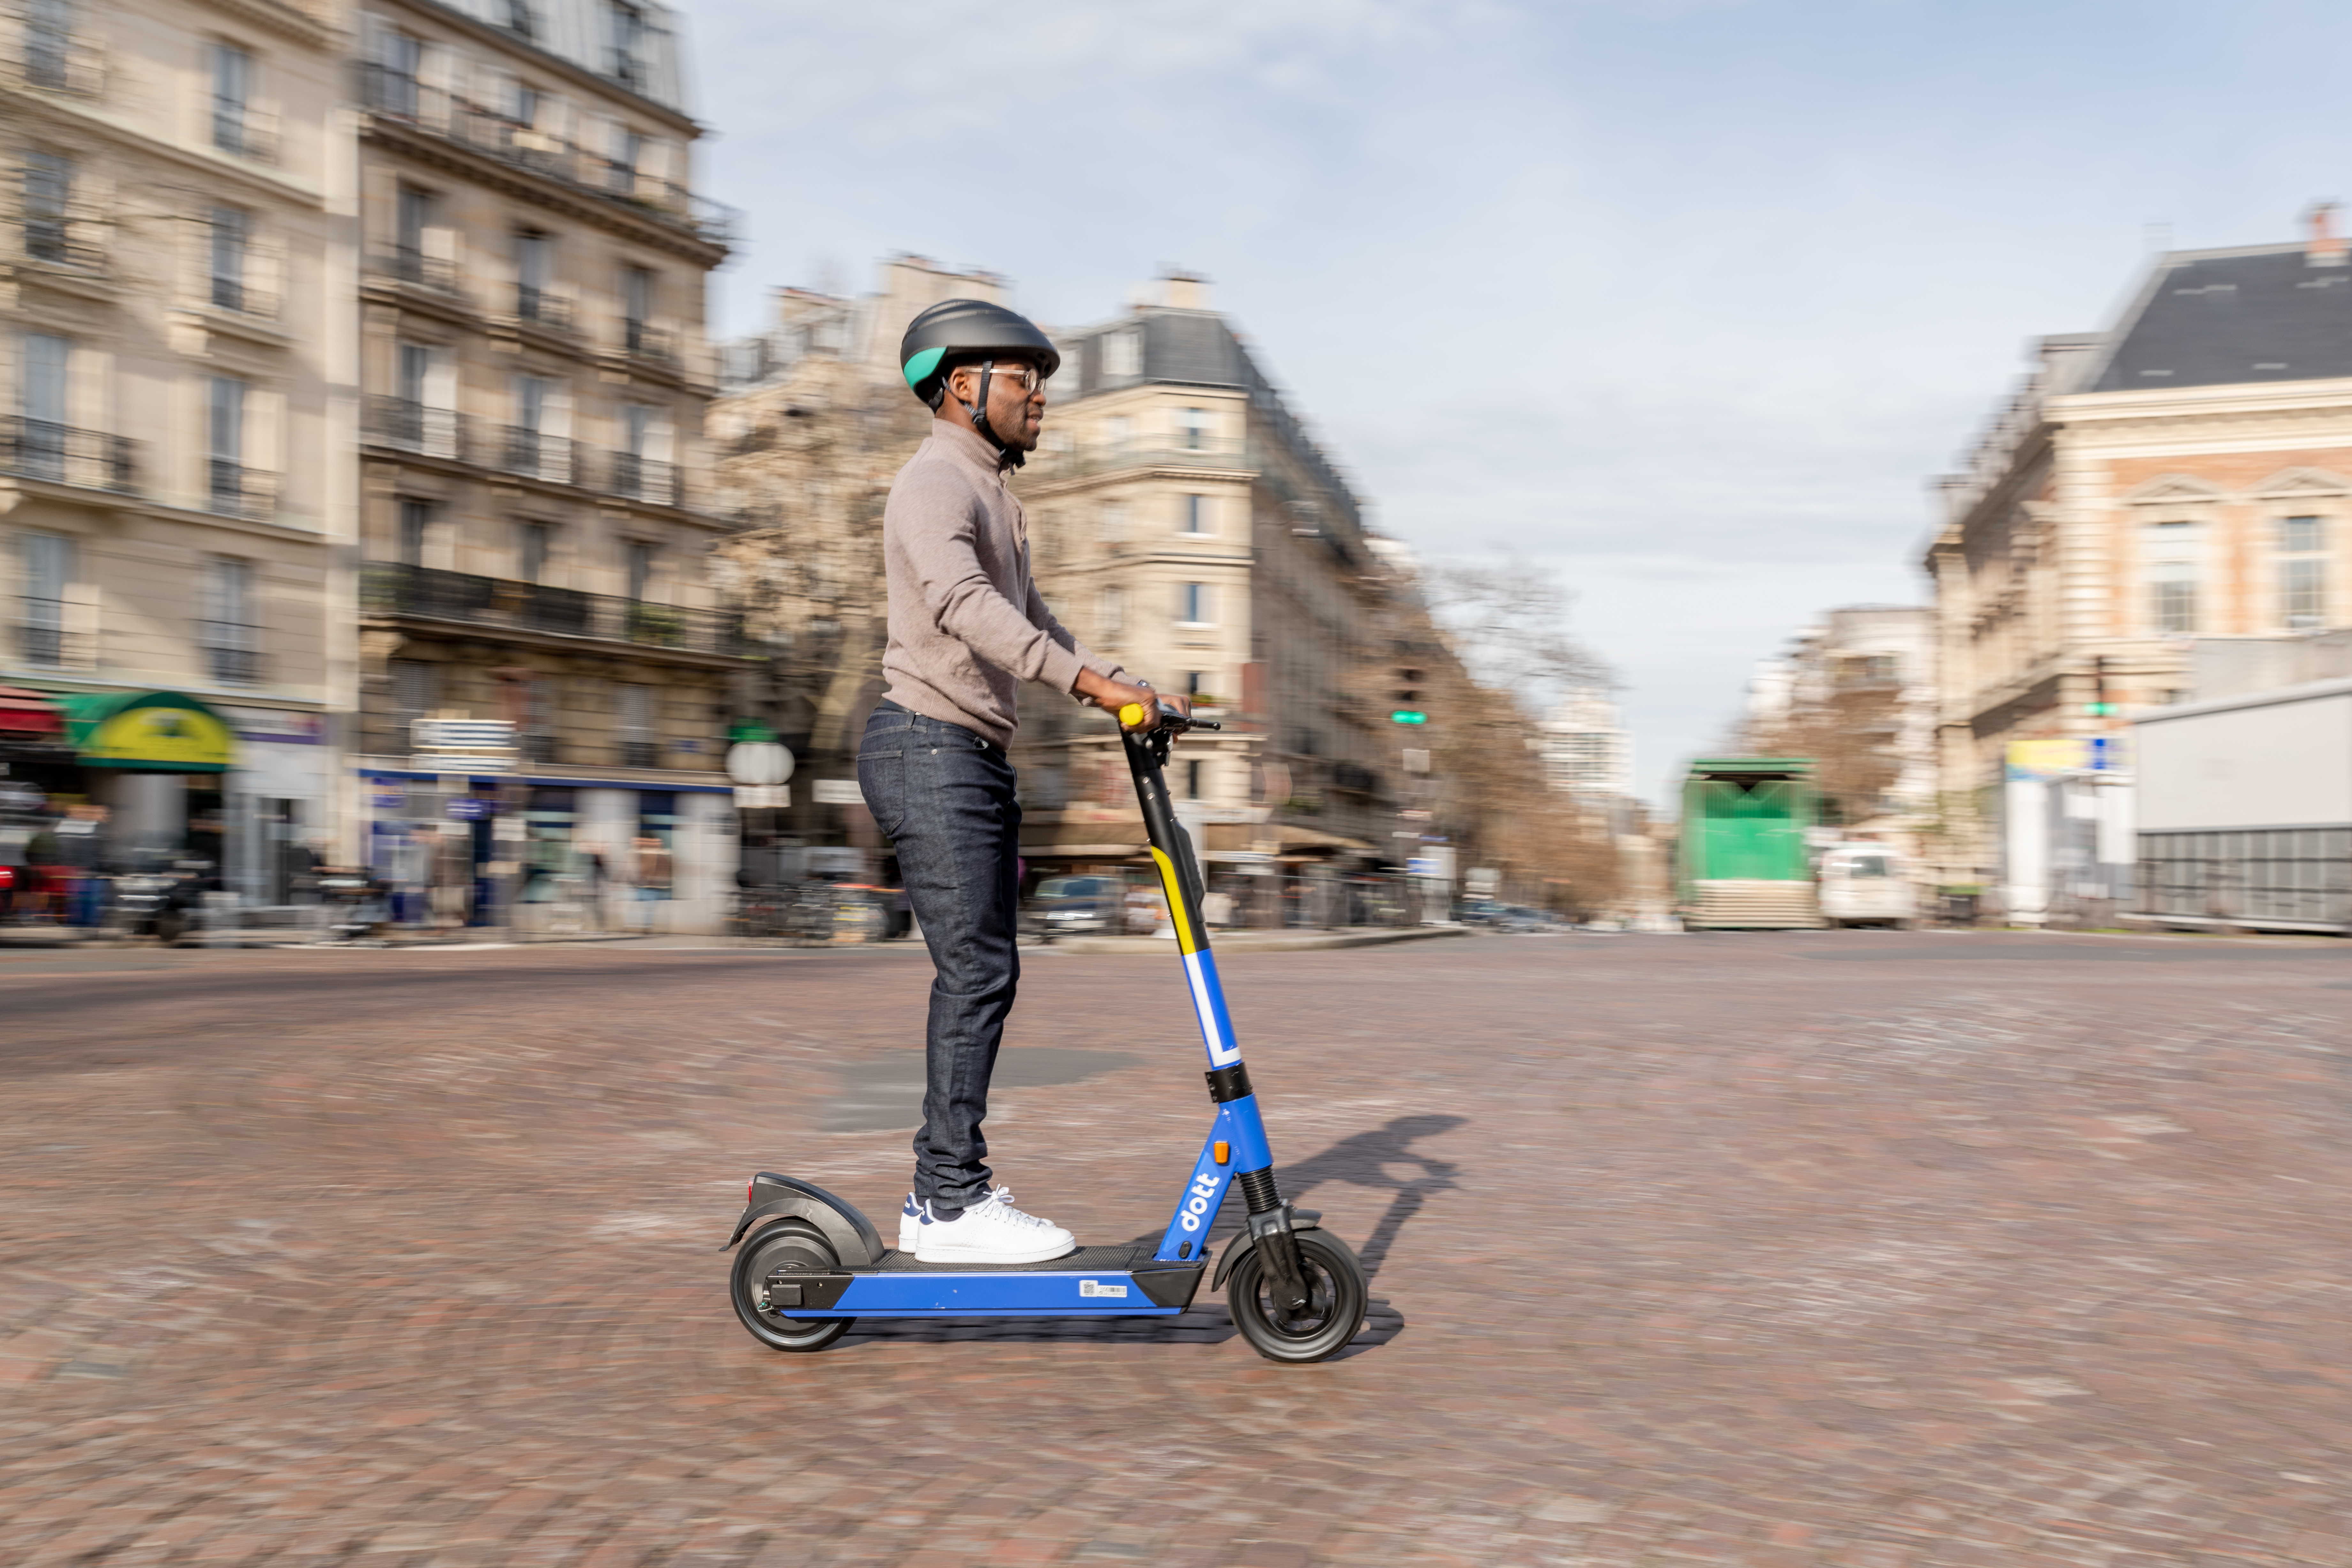 Tier, Dott to form Europe's largest e-scooter rental firm